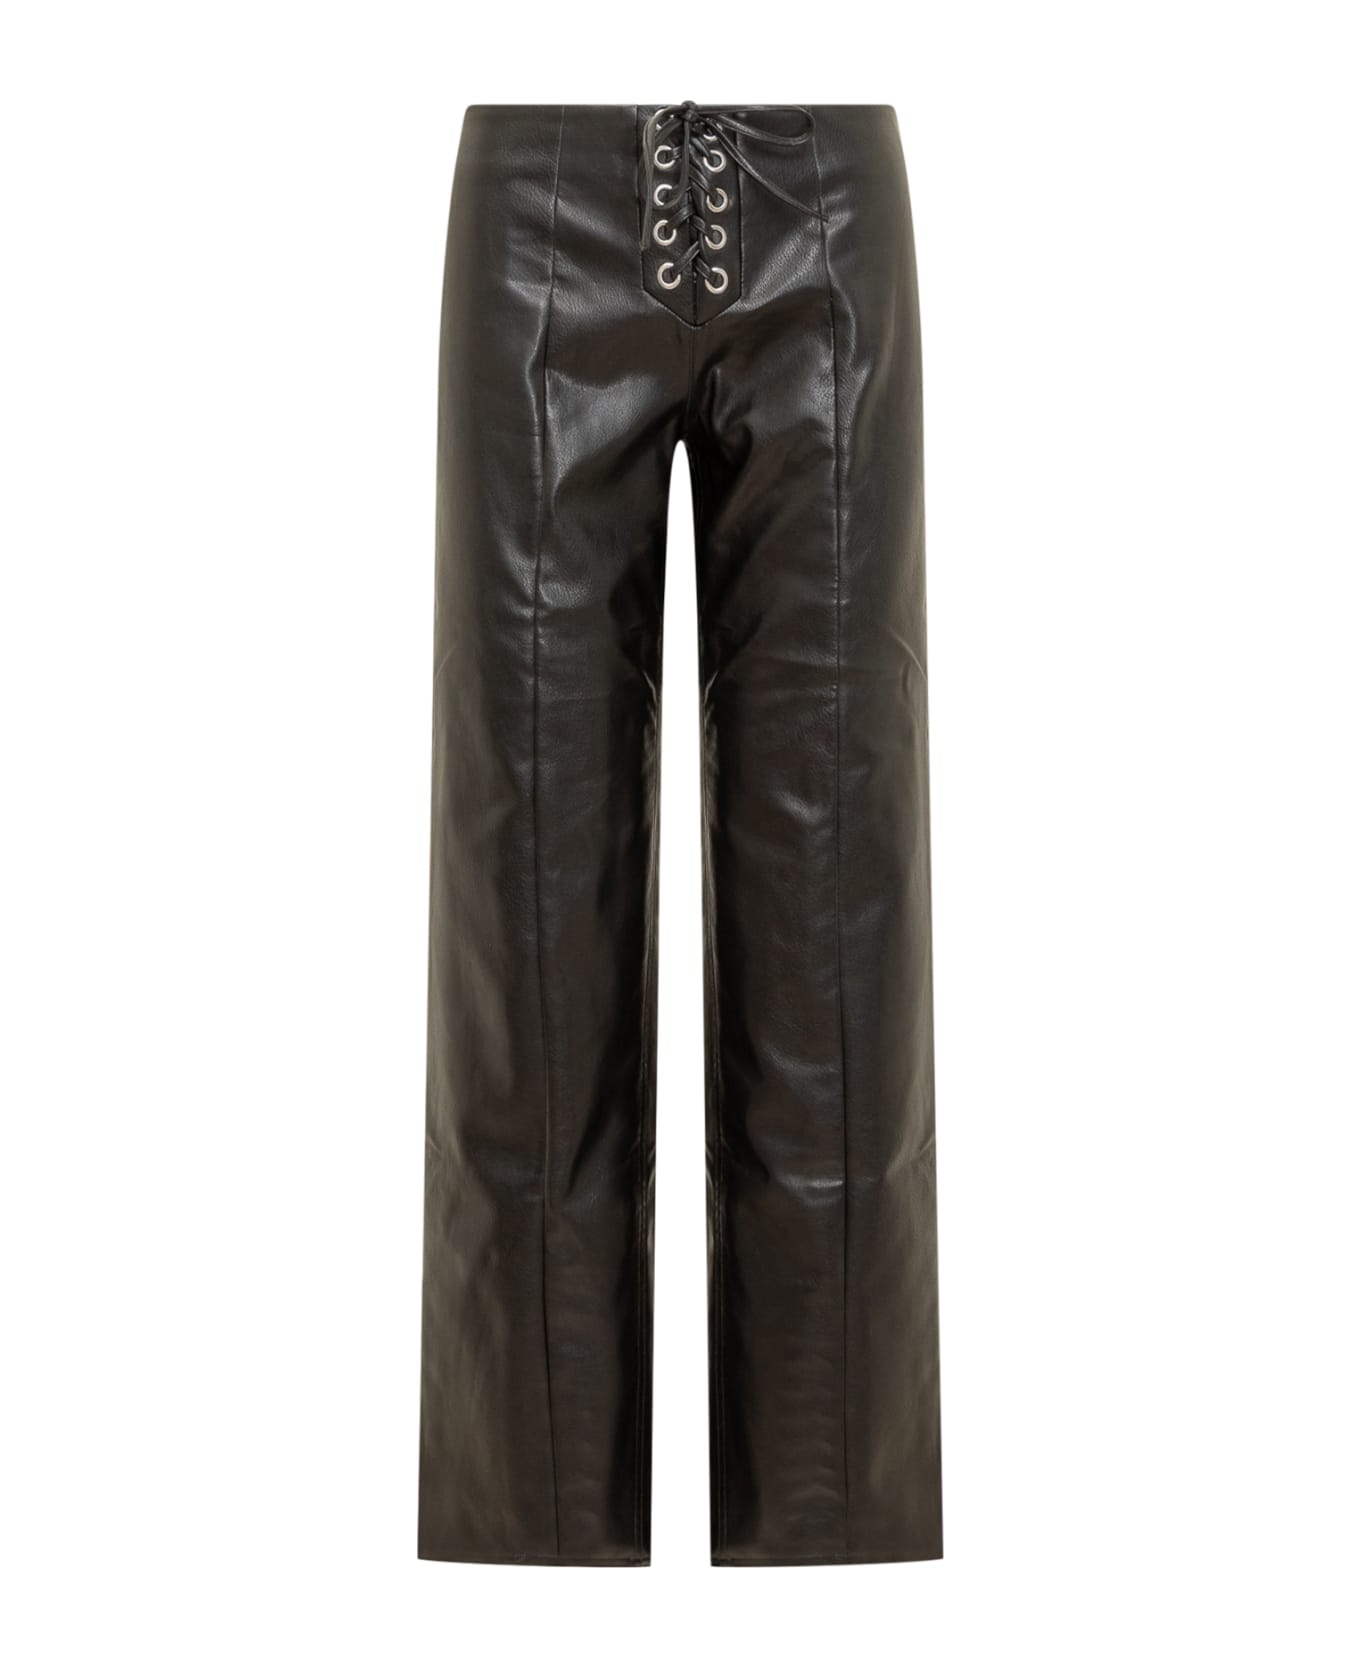 Rotate by Birger Christensen Trousers - Black